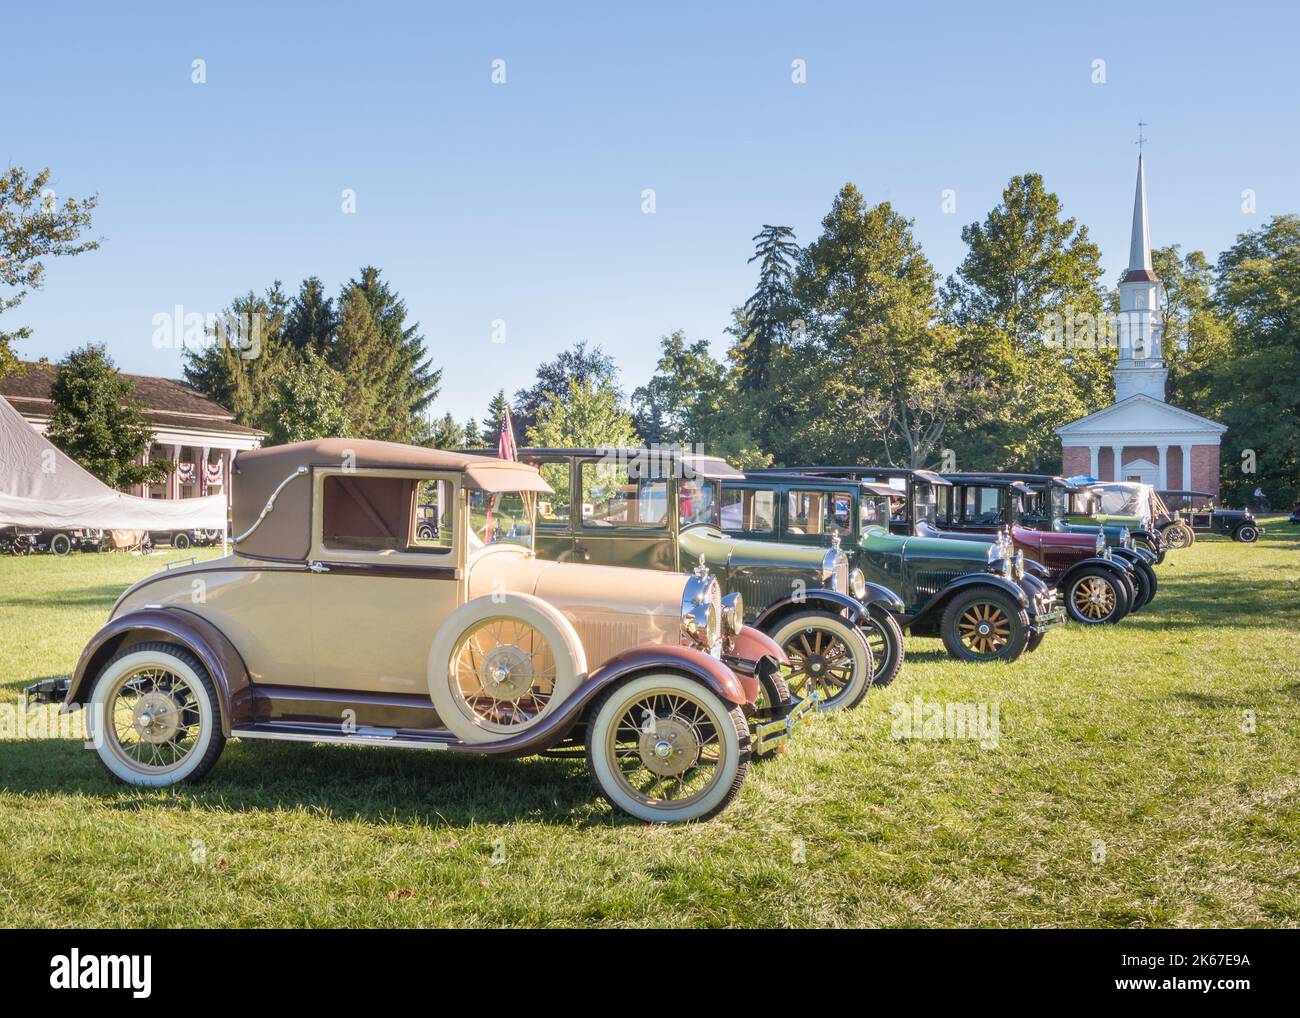 DEARBORN, MI/USA - SEPTEMBER 7, 2014: Eight antique cars, including a 1928 Ford Model A, Martha-Mary Chapel, Old Car Festival, Greenfield Village. Stock Photo